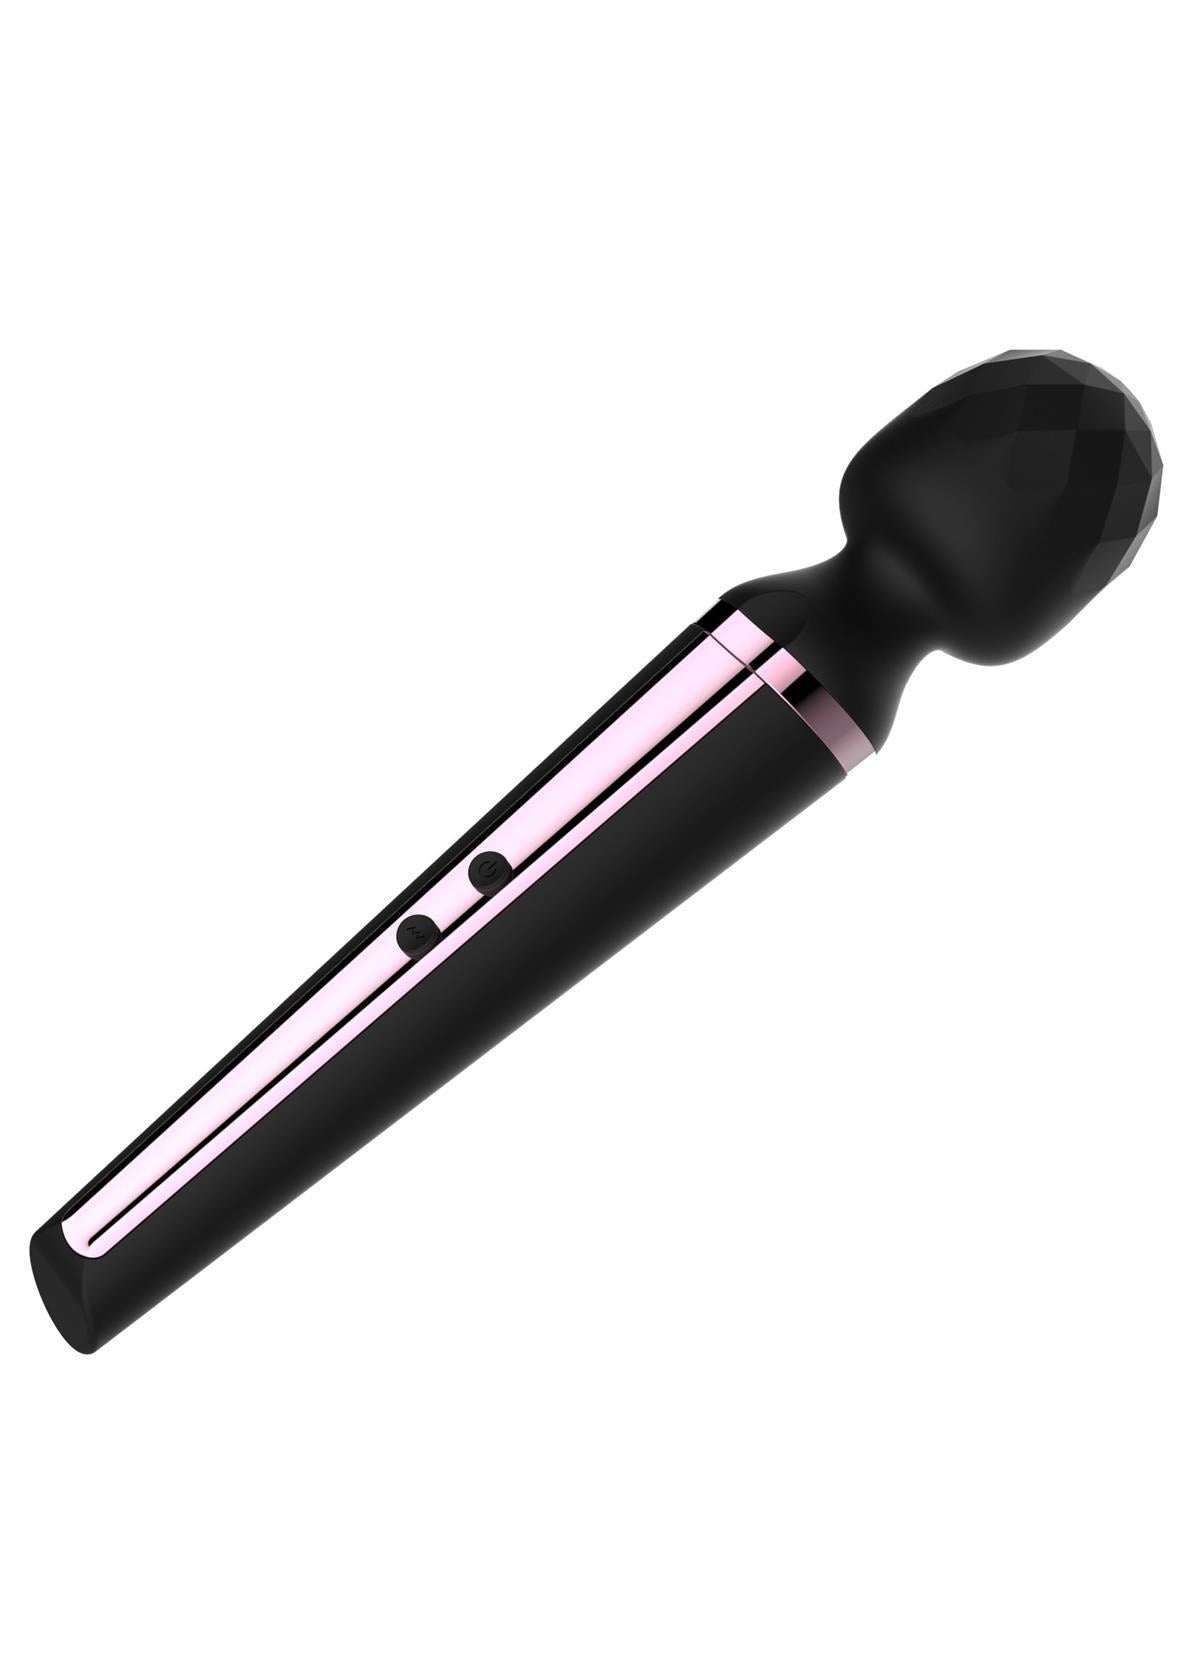 Bossoftoys - 22-00018 - Genius Luxury Wand massager - 10 Function - 31,5 cm- Black with rose gold - Rechargeable - Colour window box